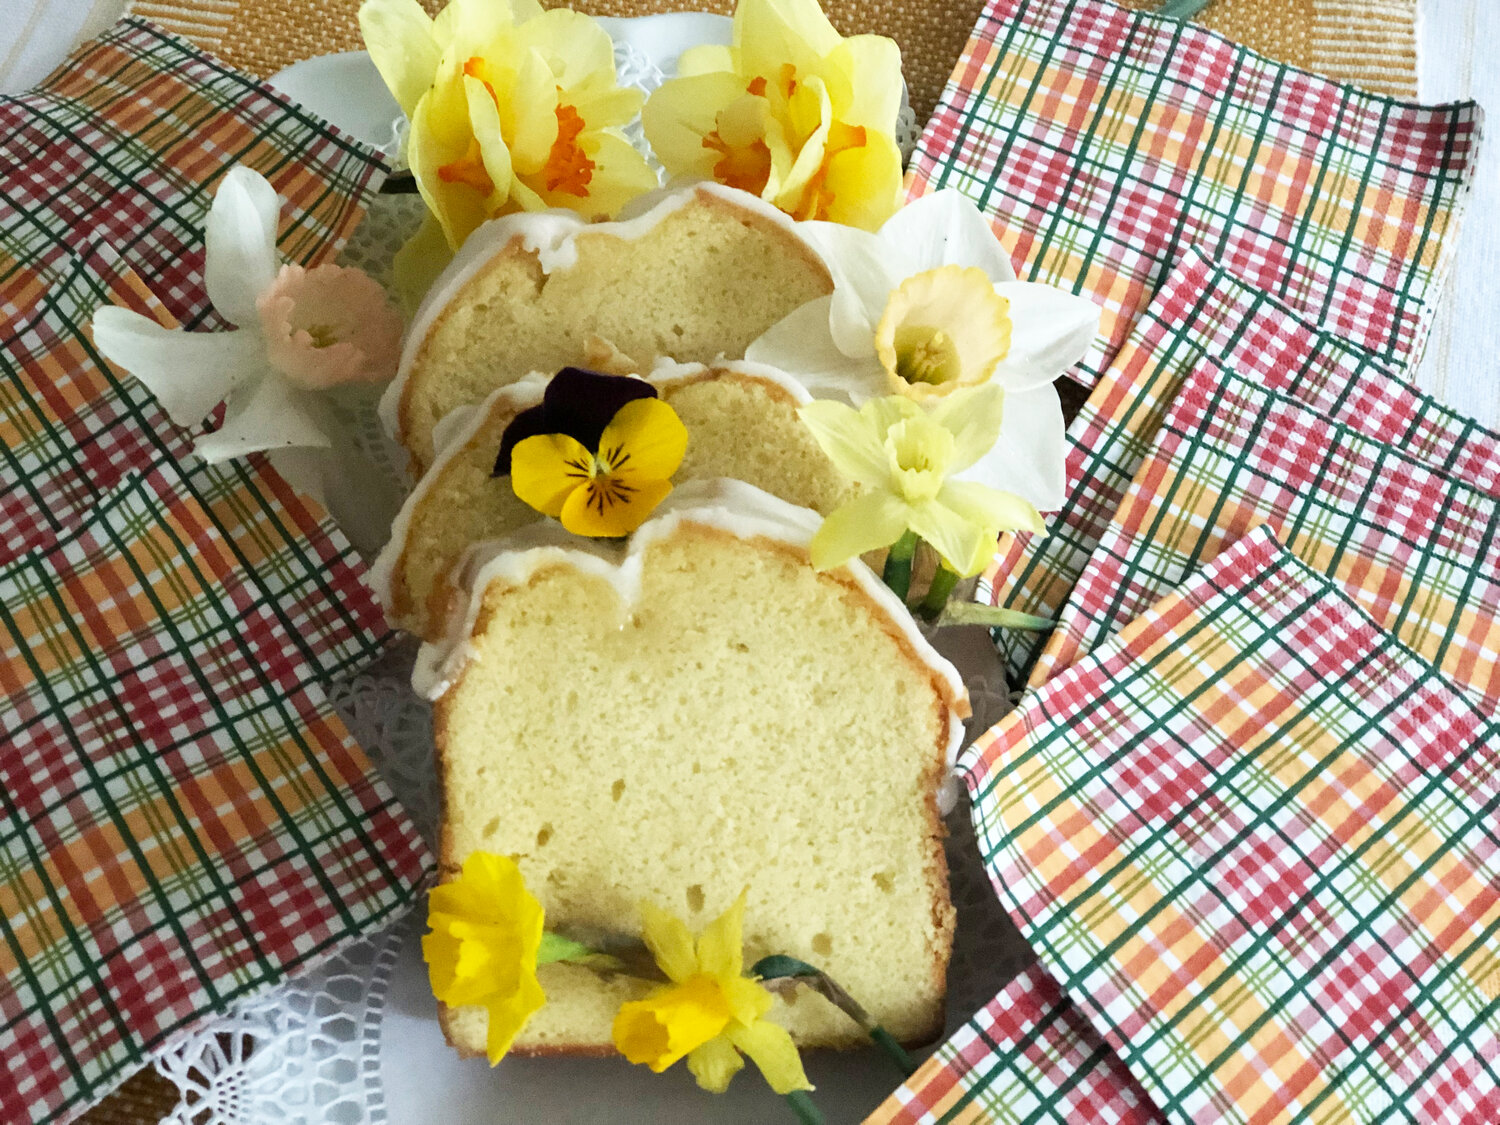 Starbucks-Inspired Lemon Loaf is infused with vibrant lemon flavor and is a delicious way to end a Daffodil Weekend picnic.